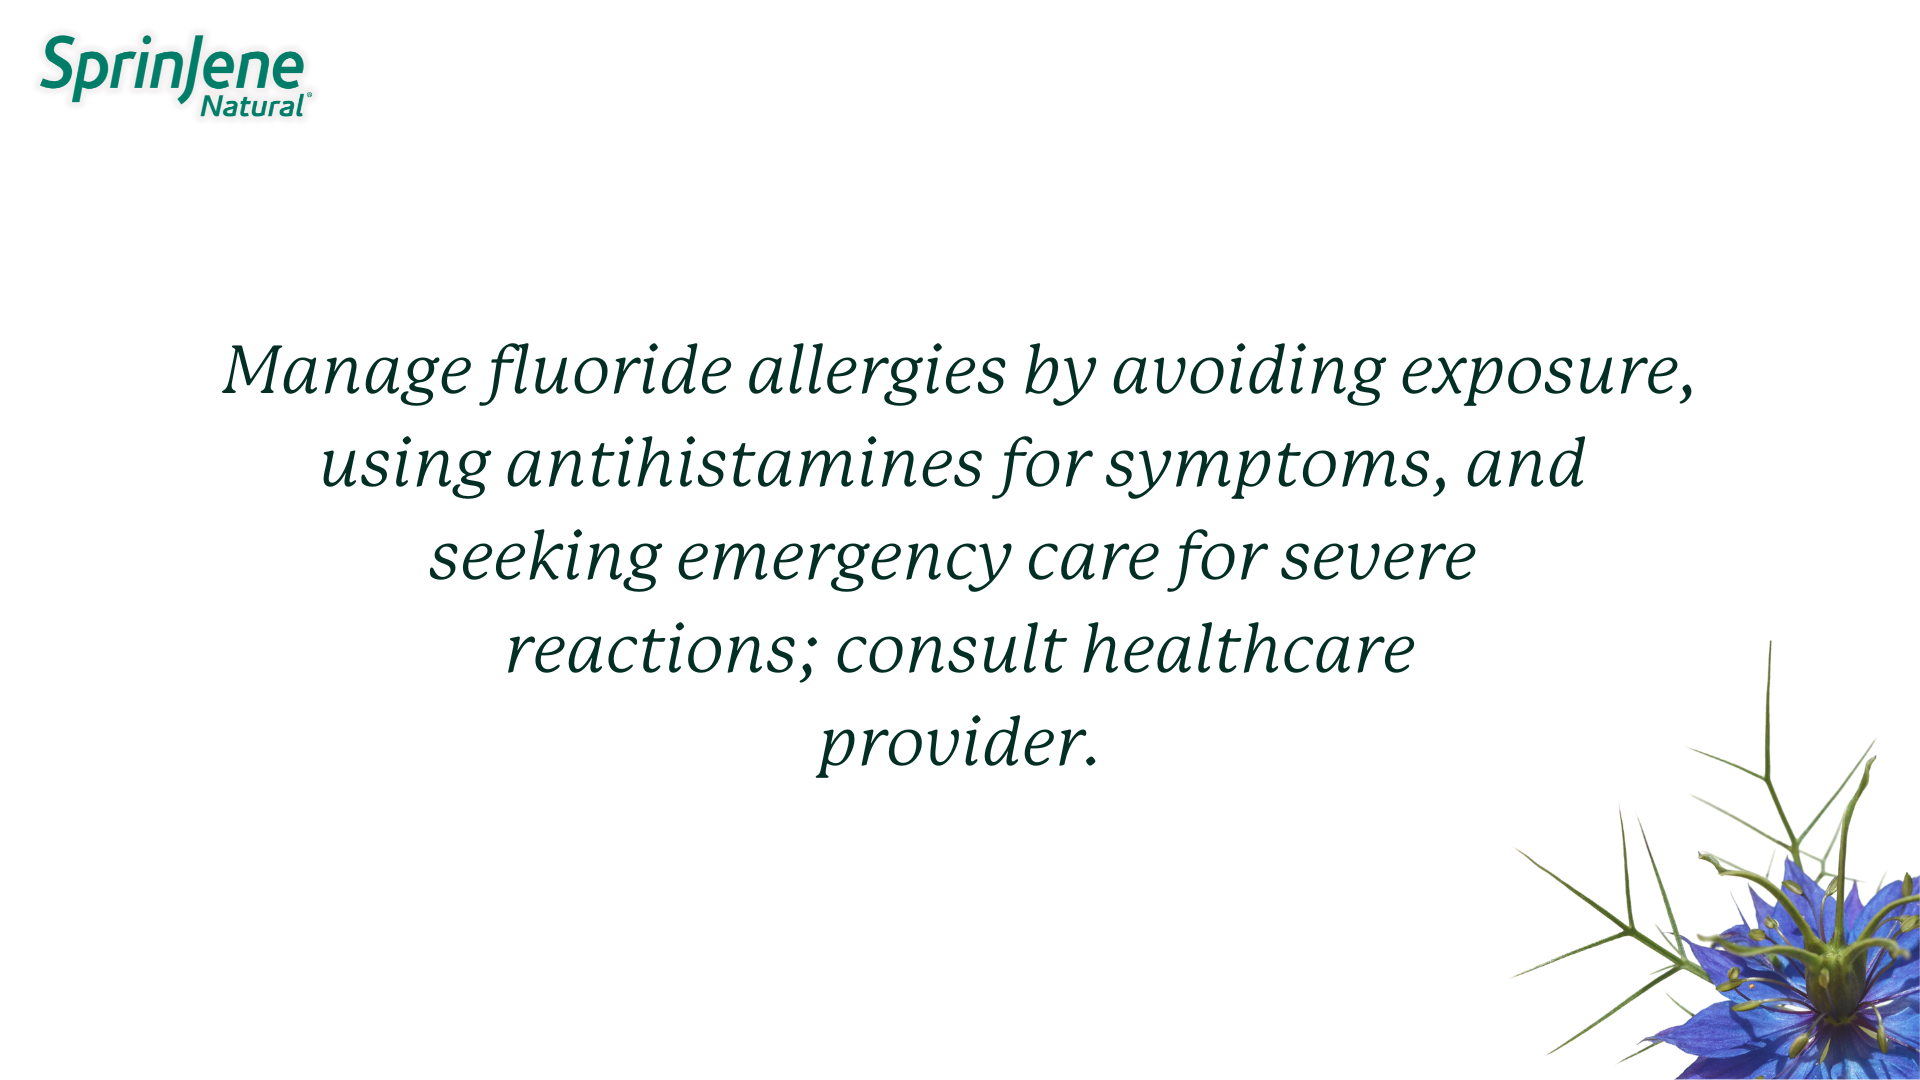 How to manage fluoride allergies